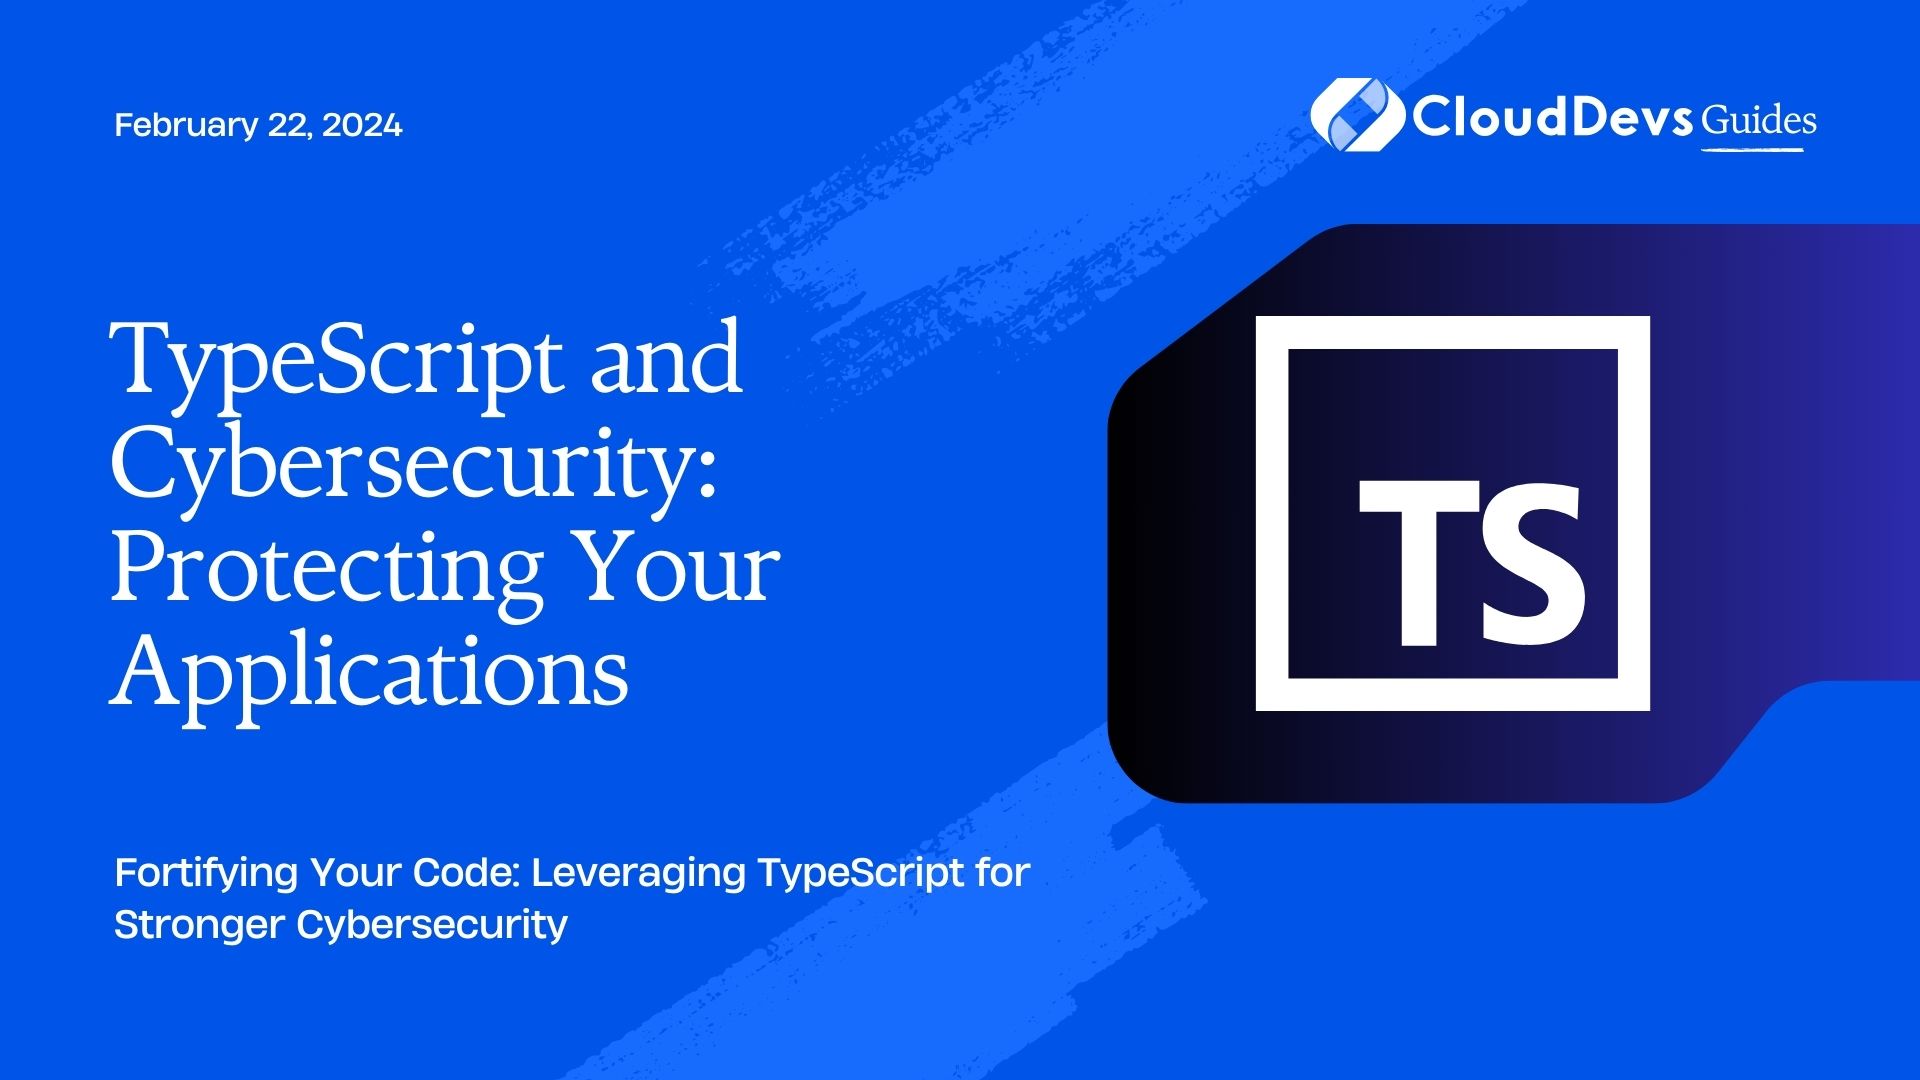 TypeScript and Cybersecurity: Protecting Your Applications